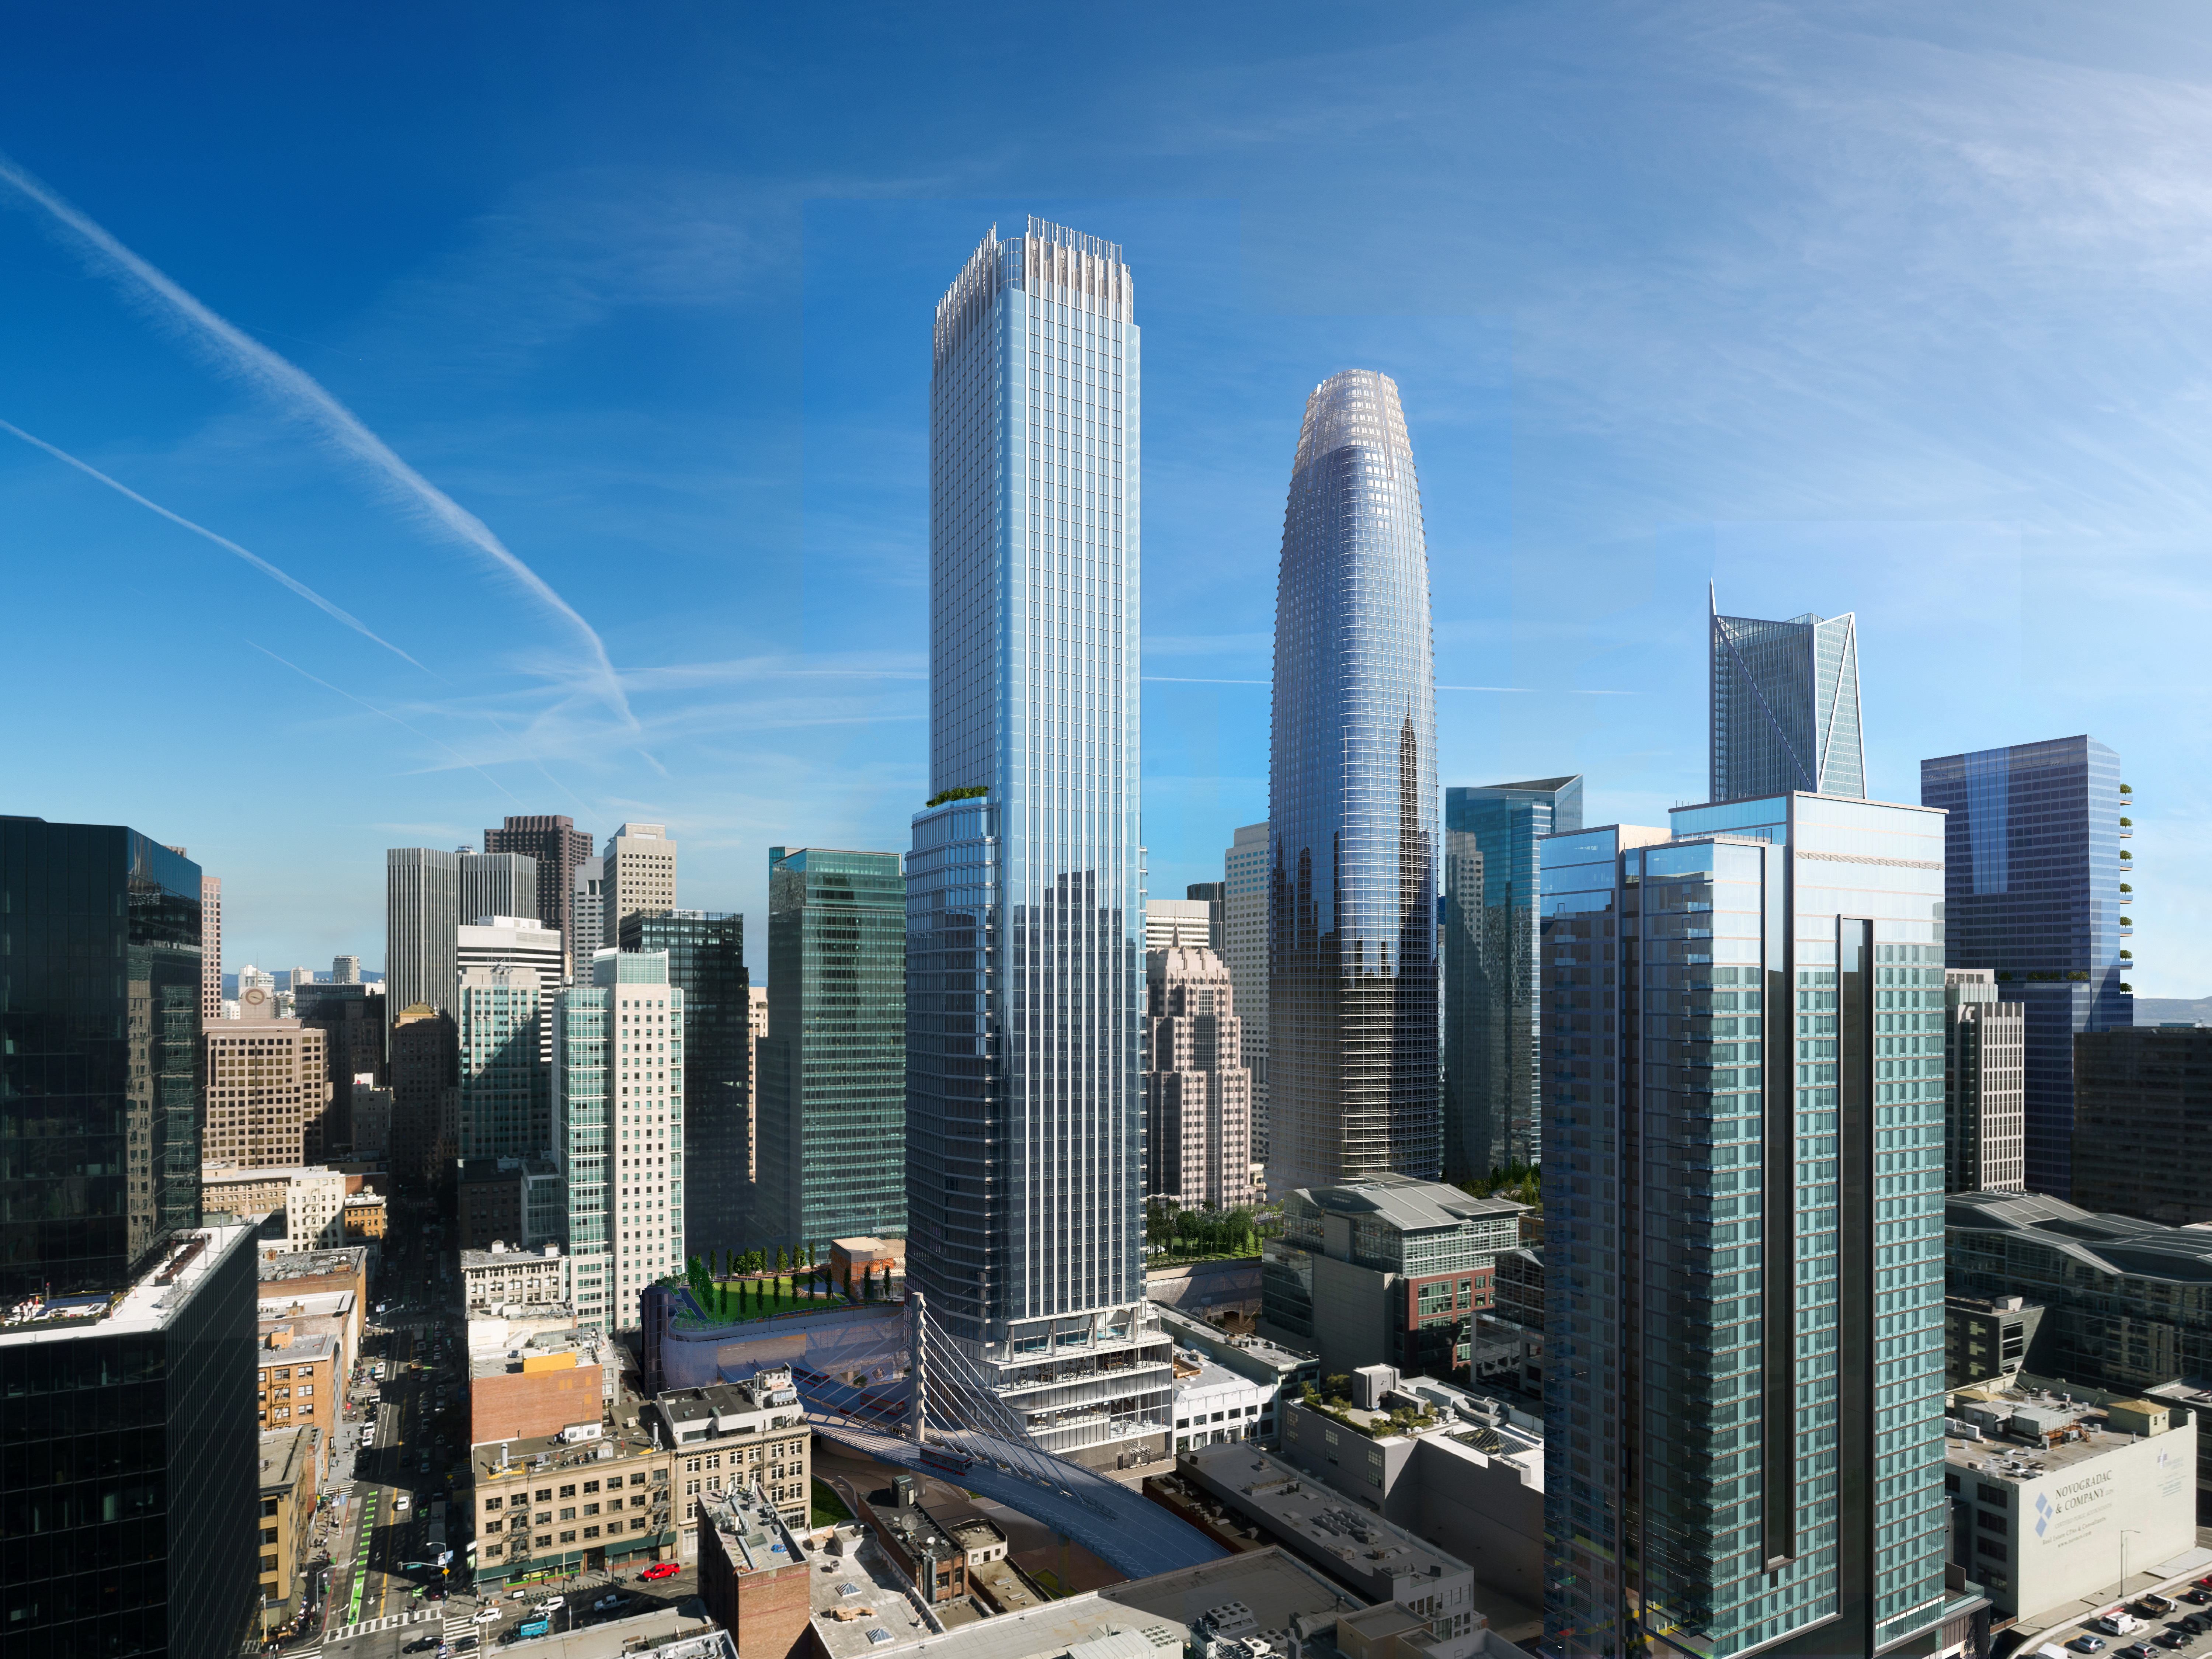 Updated rendering of Transbay Parcel F (left) next to the Salesforce Tower (right), courtesy of Pelli Clark Pelli and SteelBlue